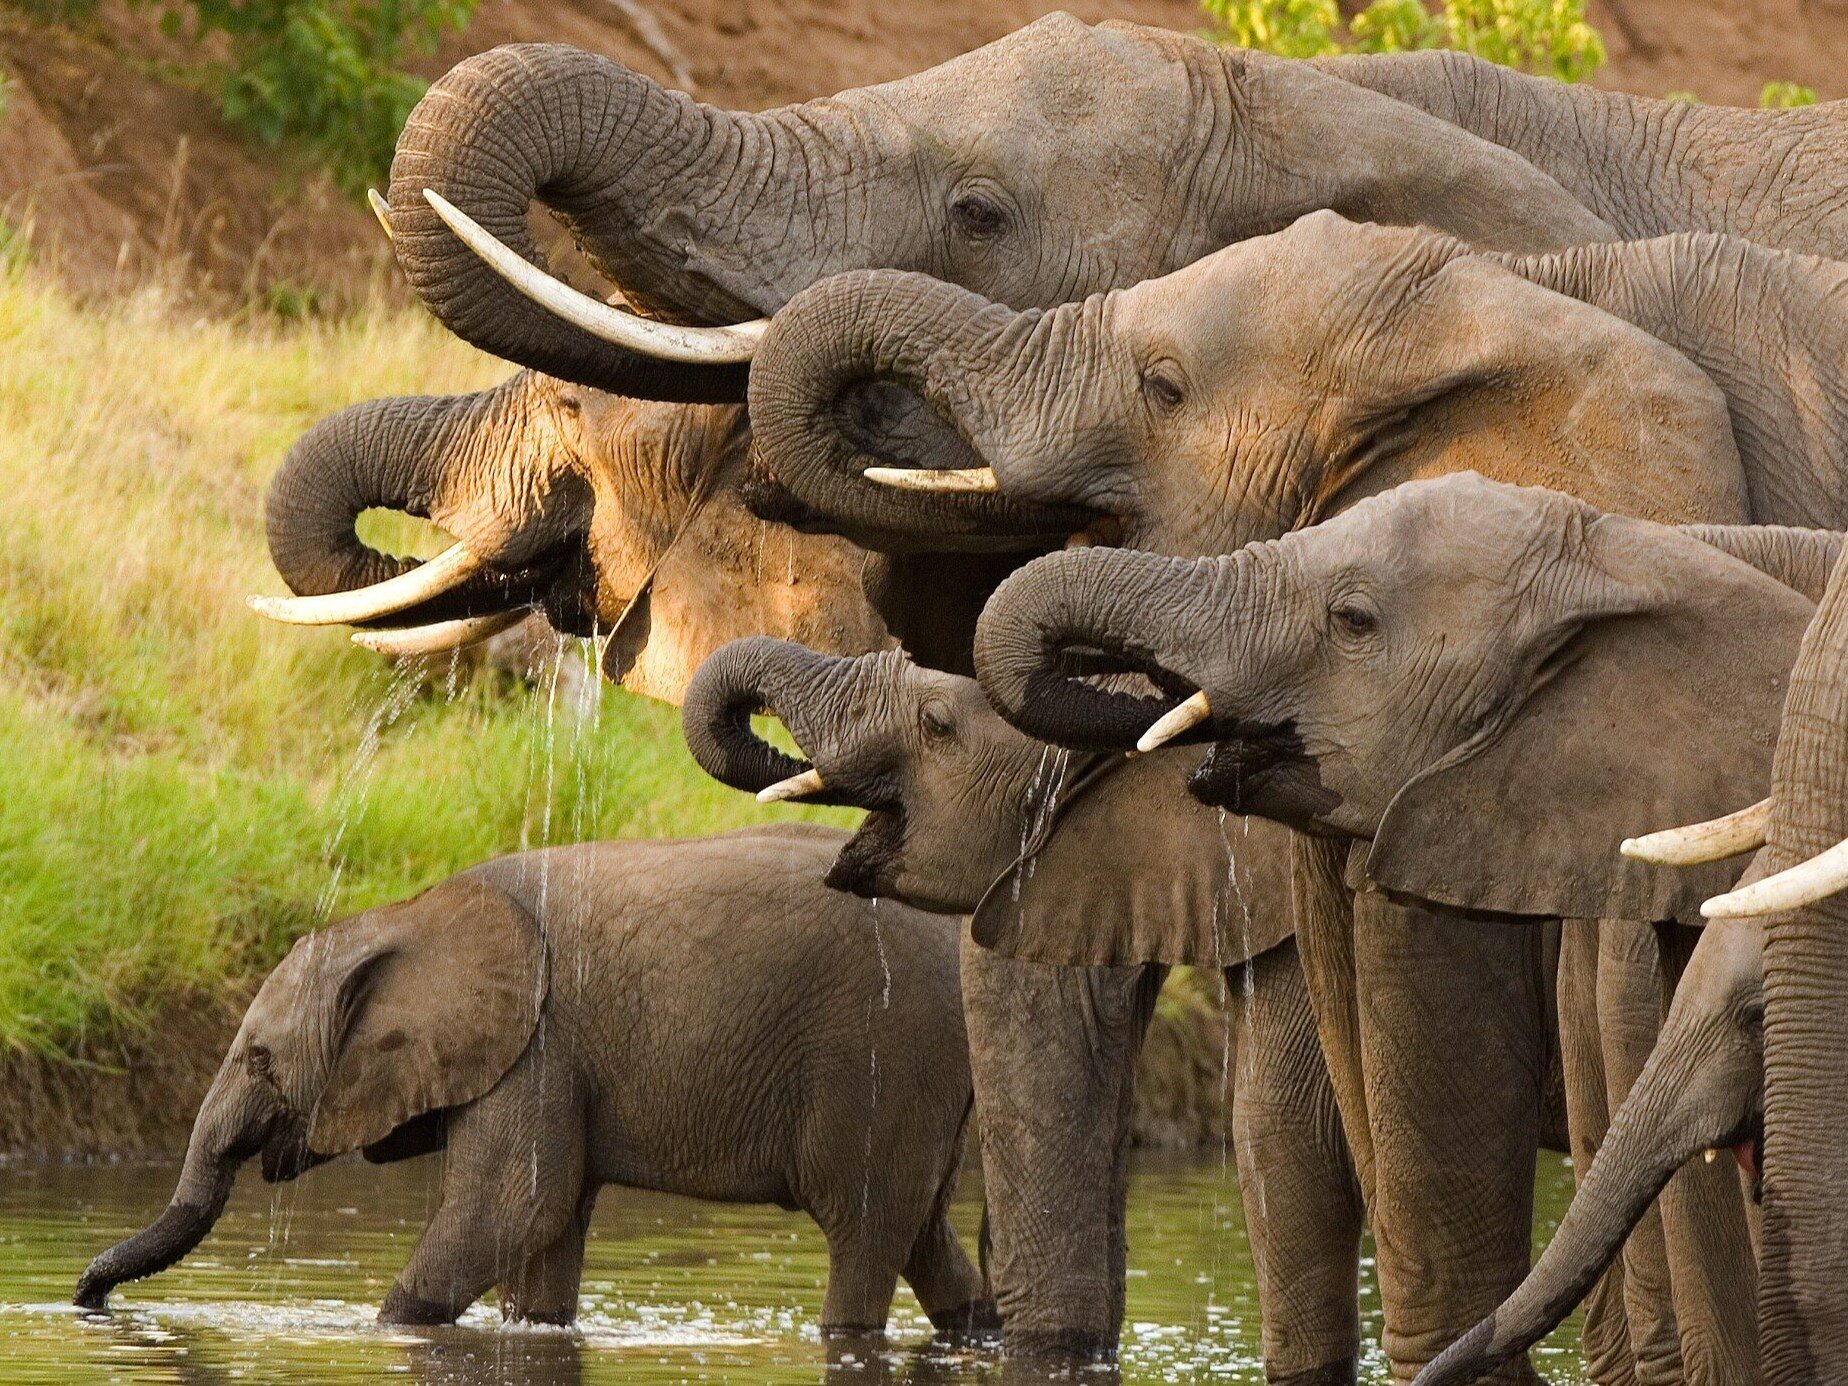 Elephants give themselves names.  Groundbreaking research results